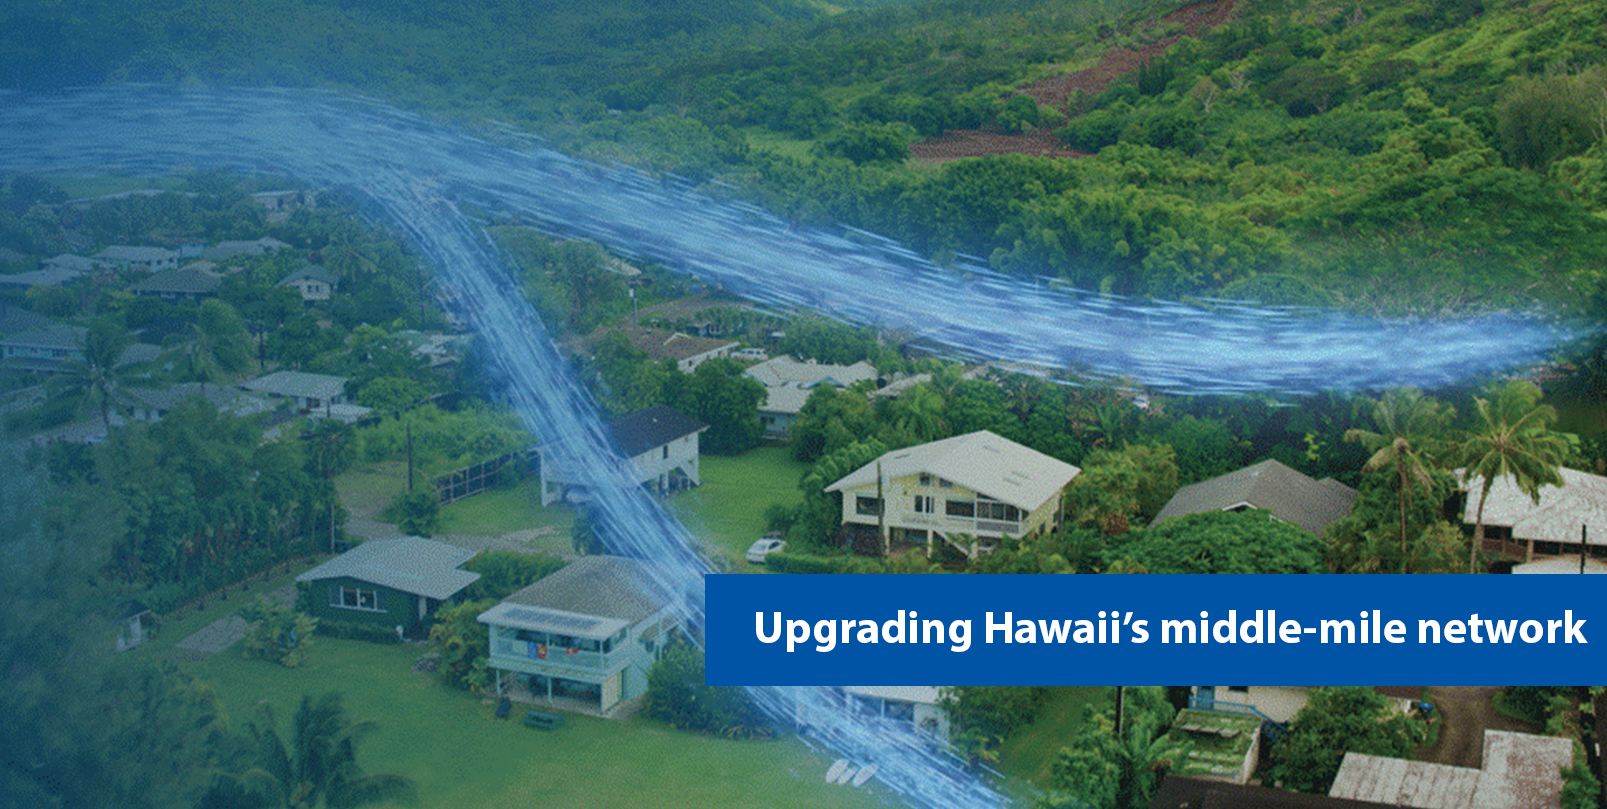 Upgrading Hawaii’s middle-mile network